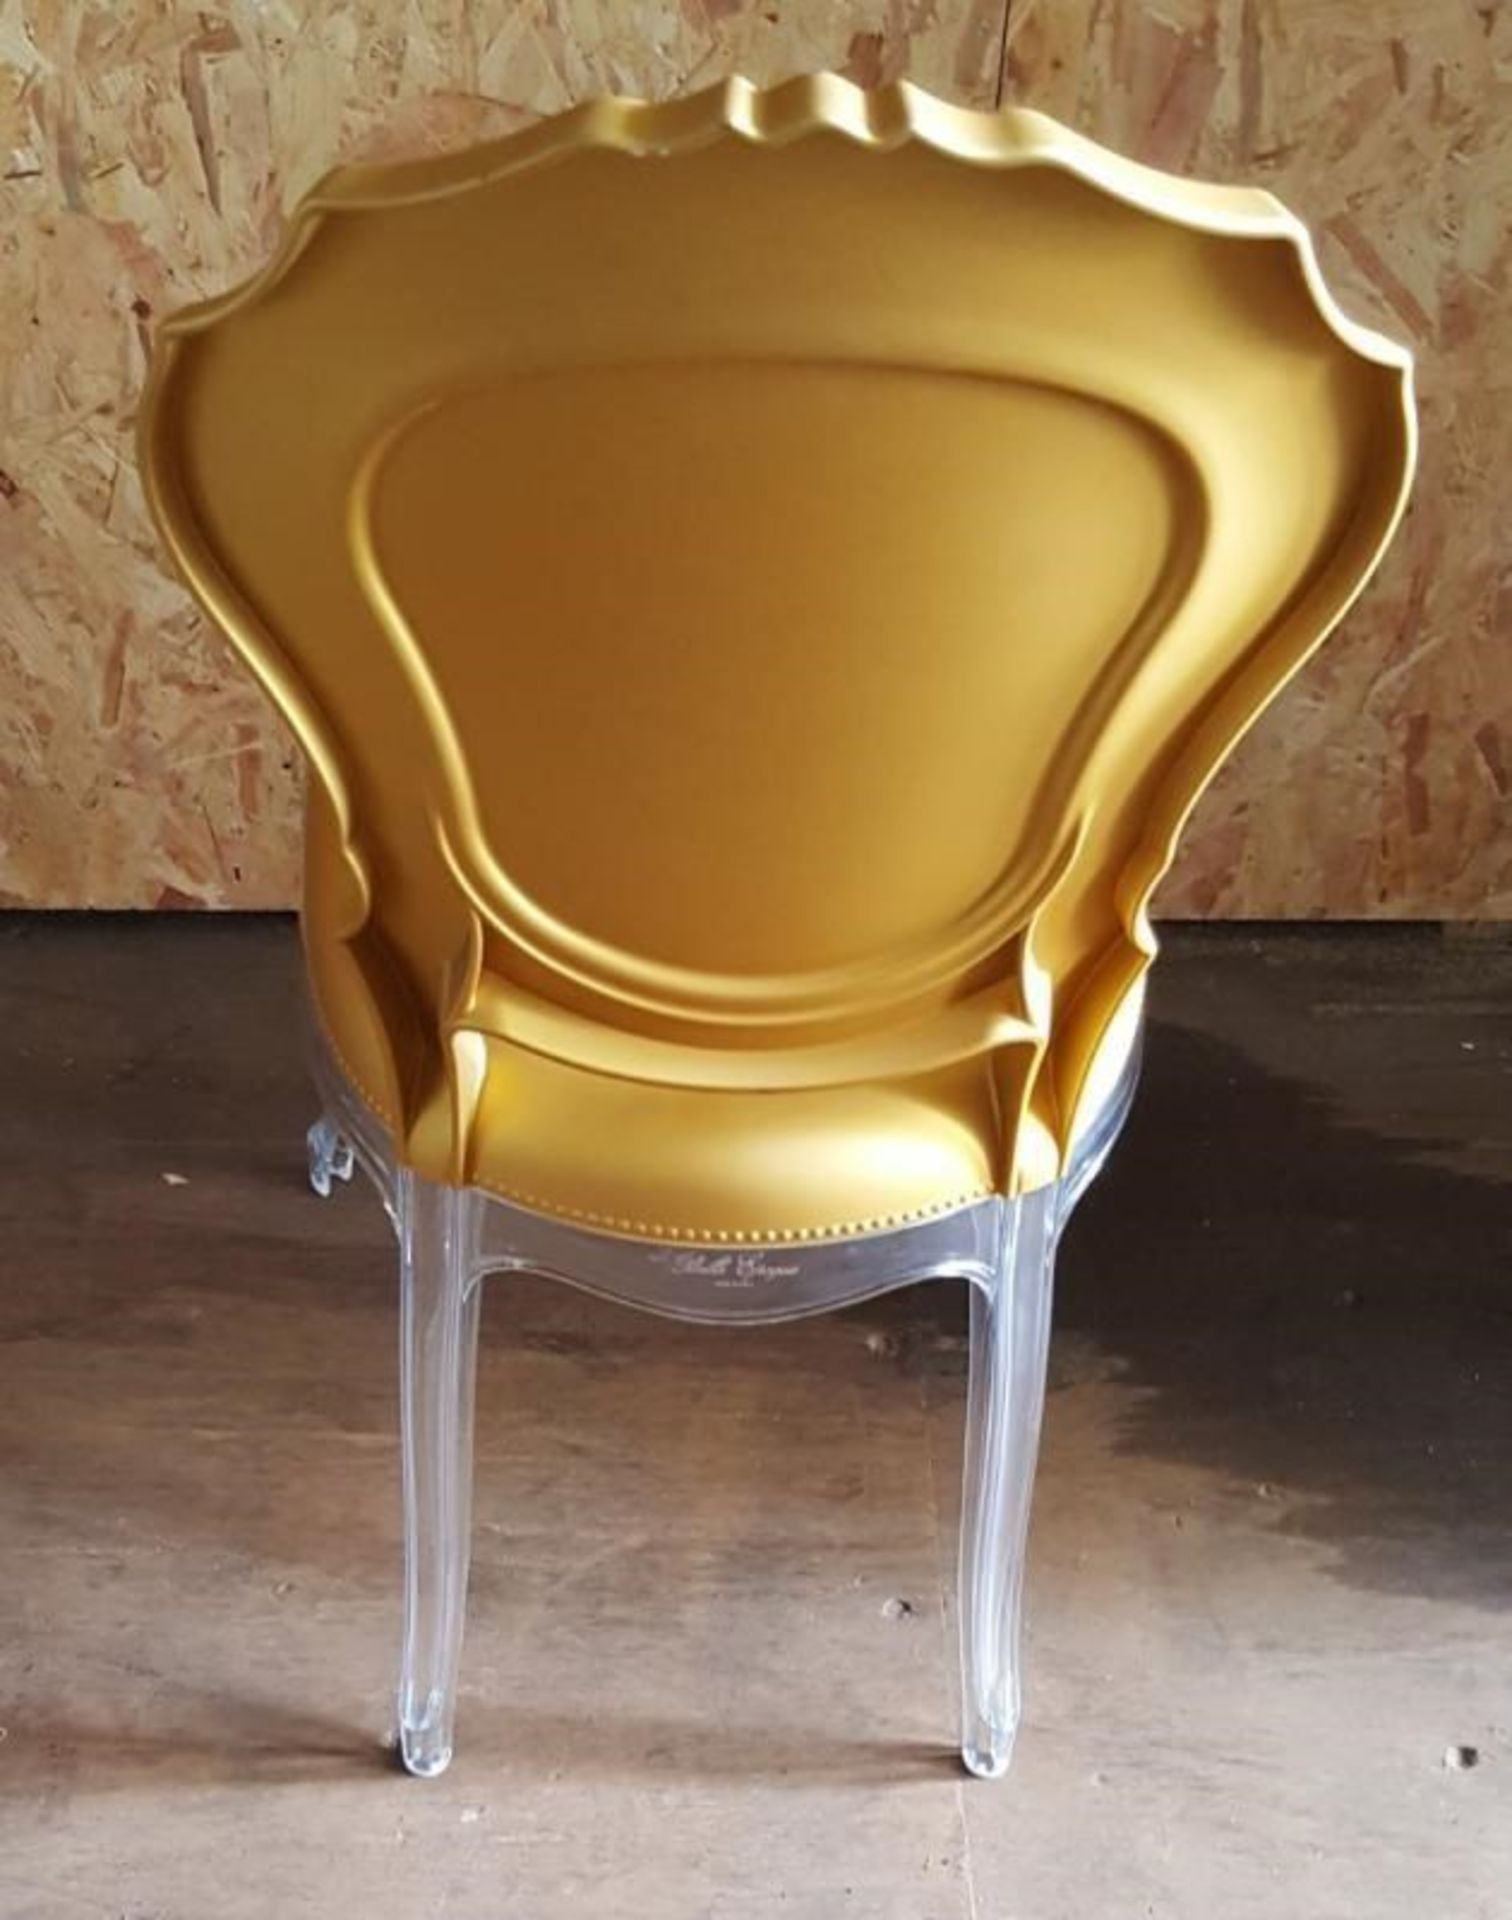 5 X ACRYLIC BAROQUE-STYLE 'BELLE EPOQUE' CHAIRS FEATURING A CLEAR - Image 3 of 4